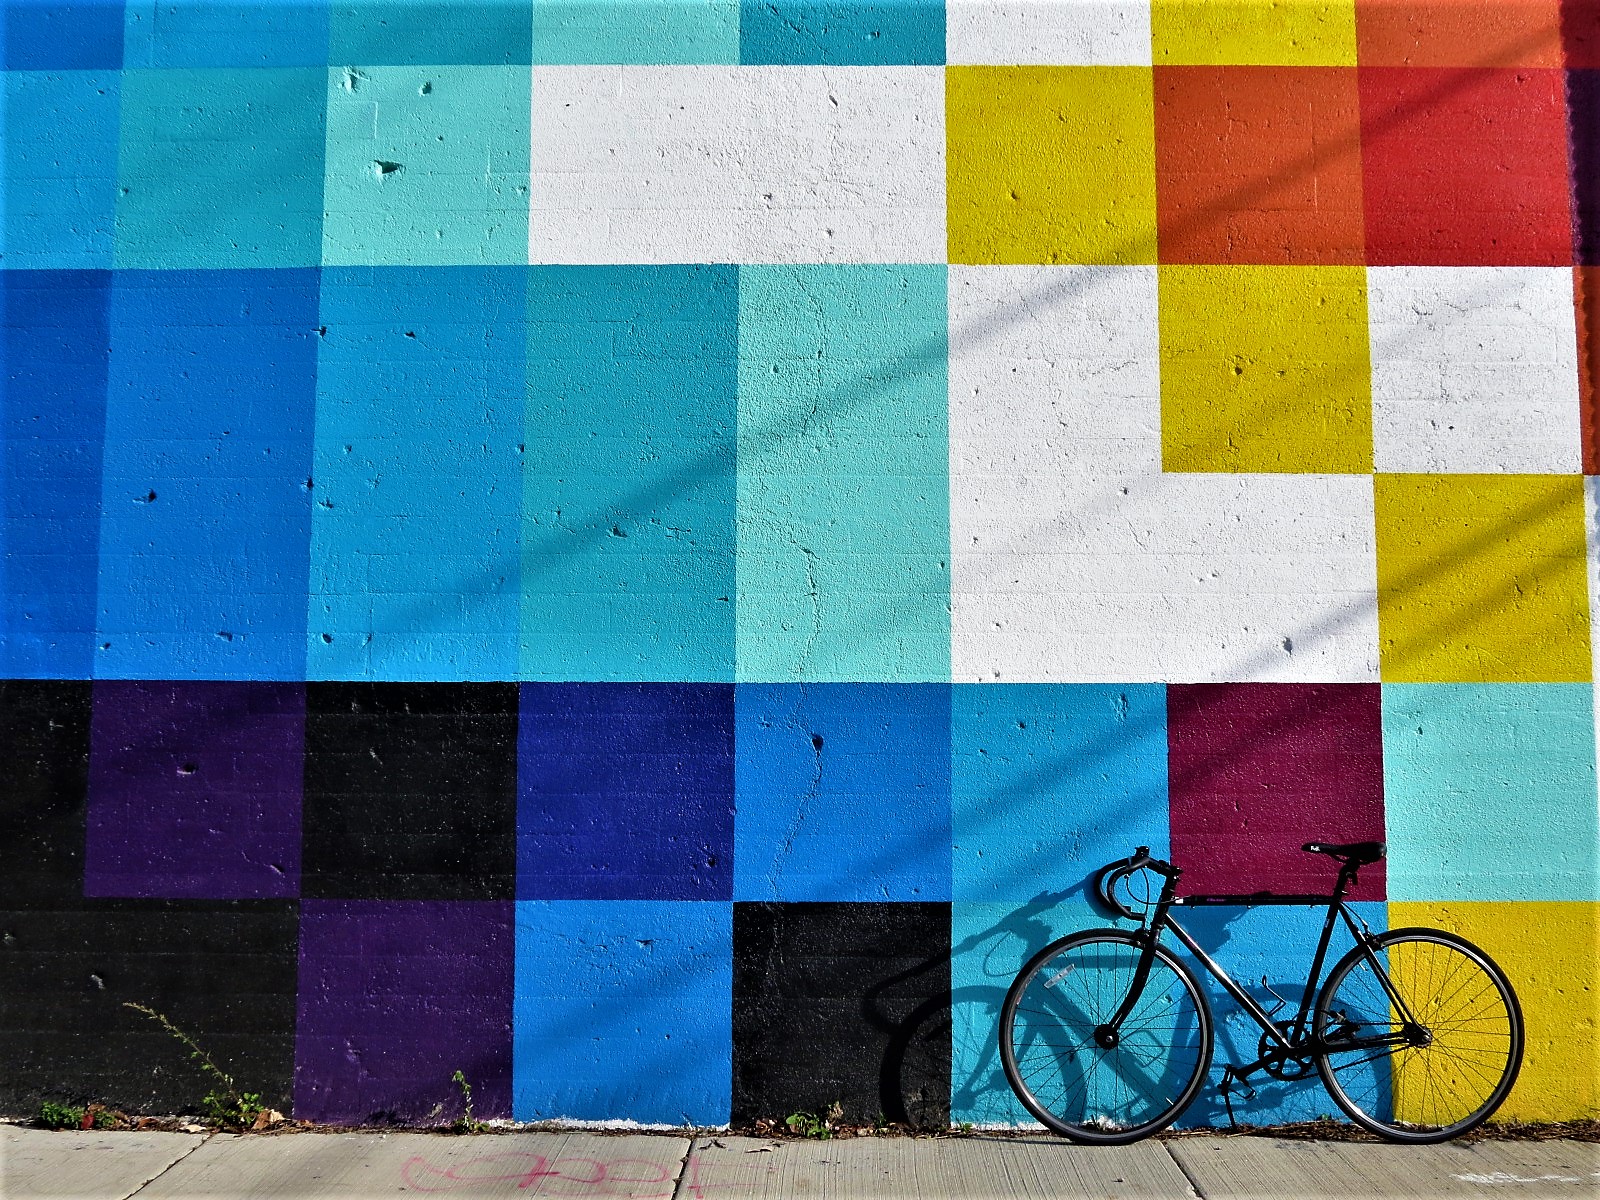 A tour bike leaning on a Felipe Pantone mural of multicolored squares.